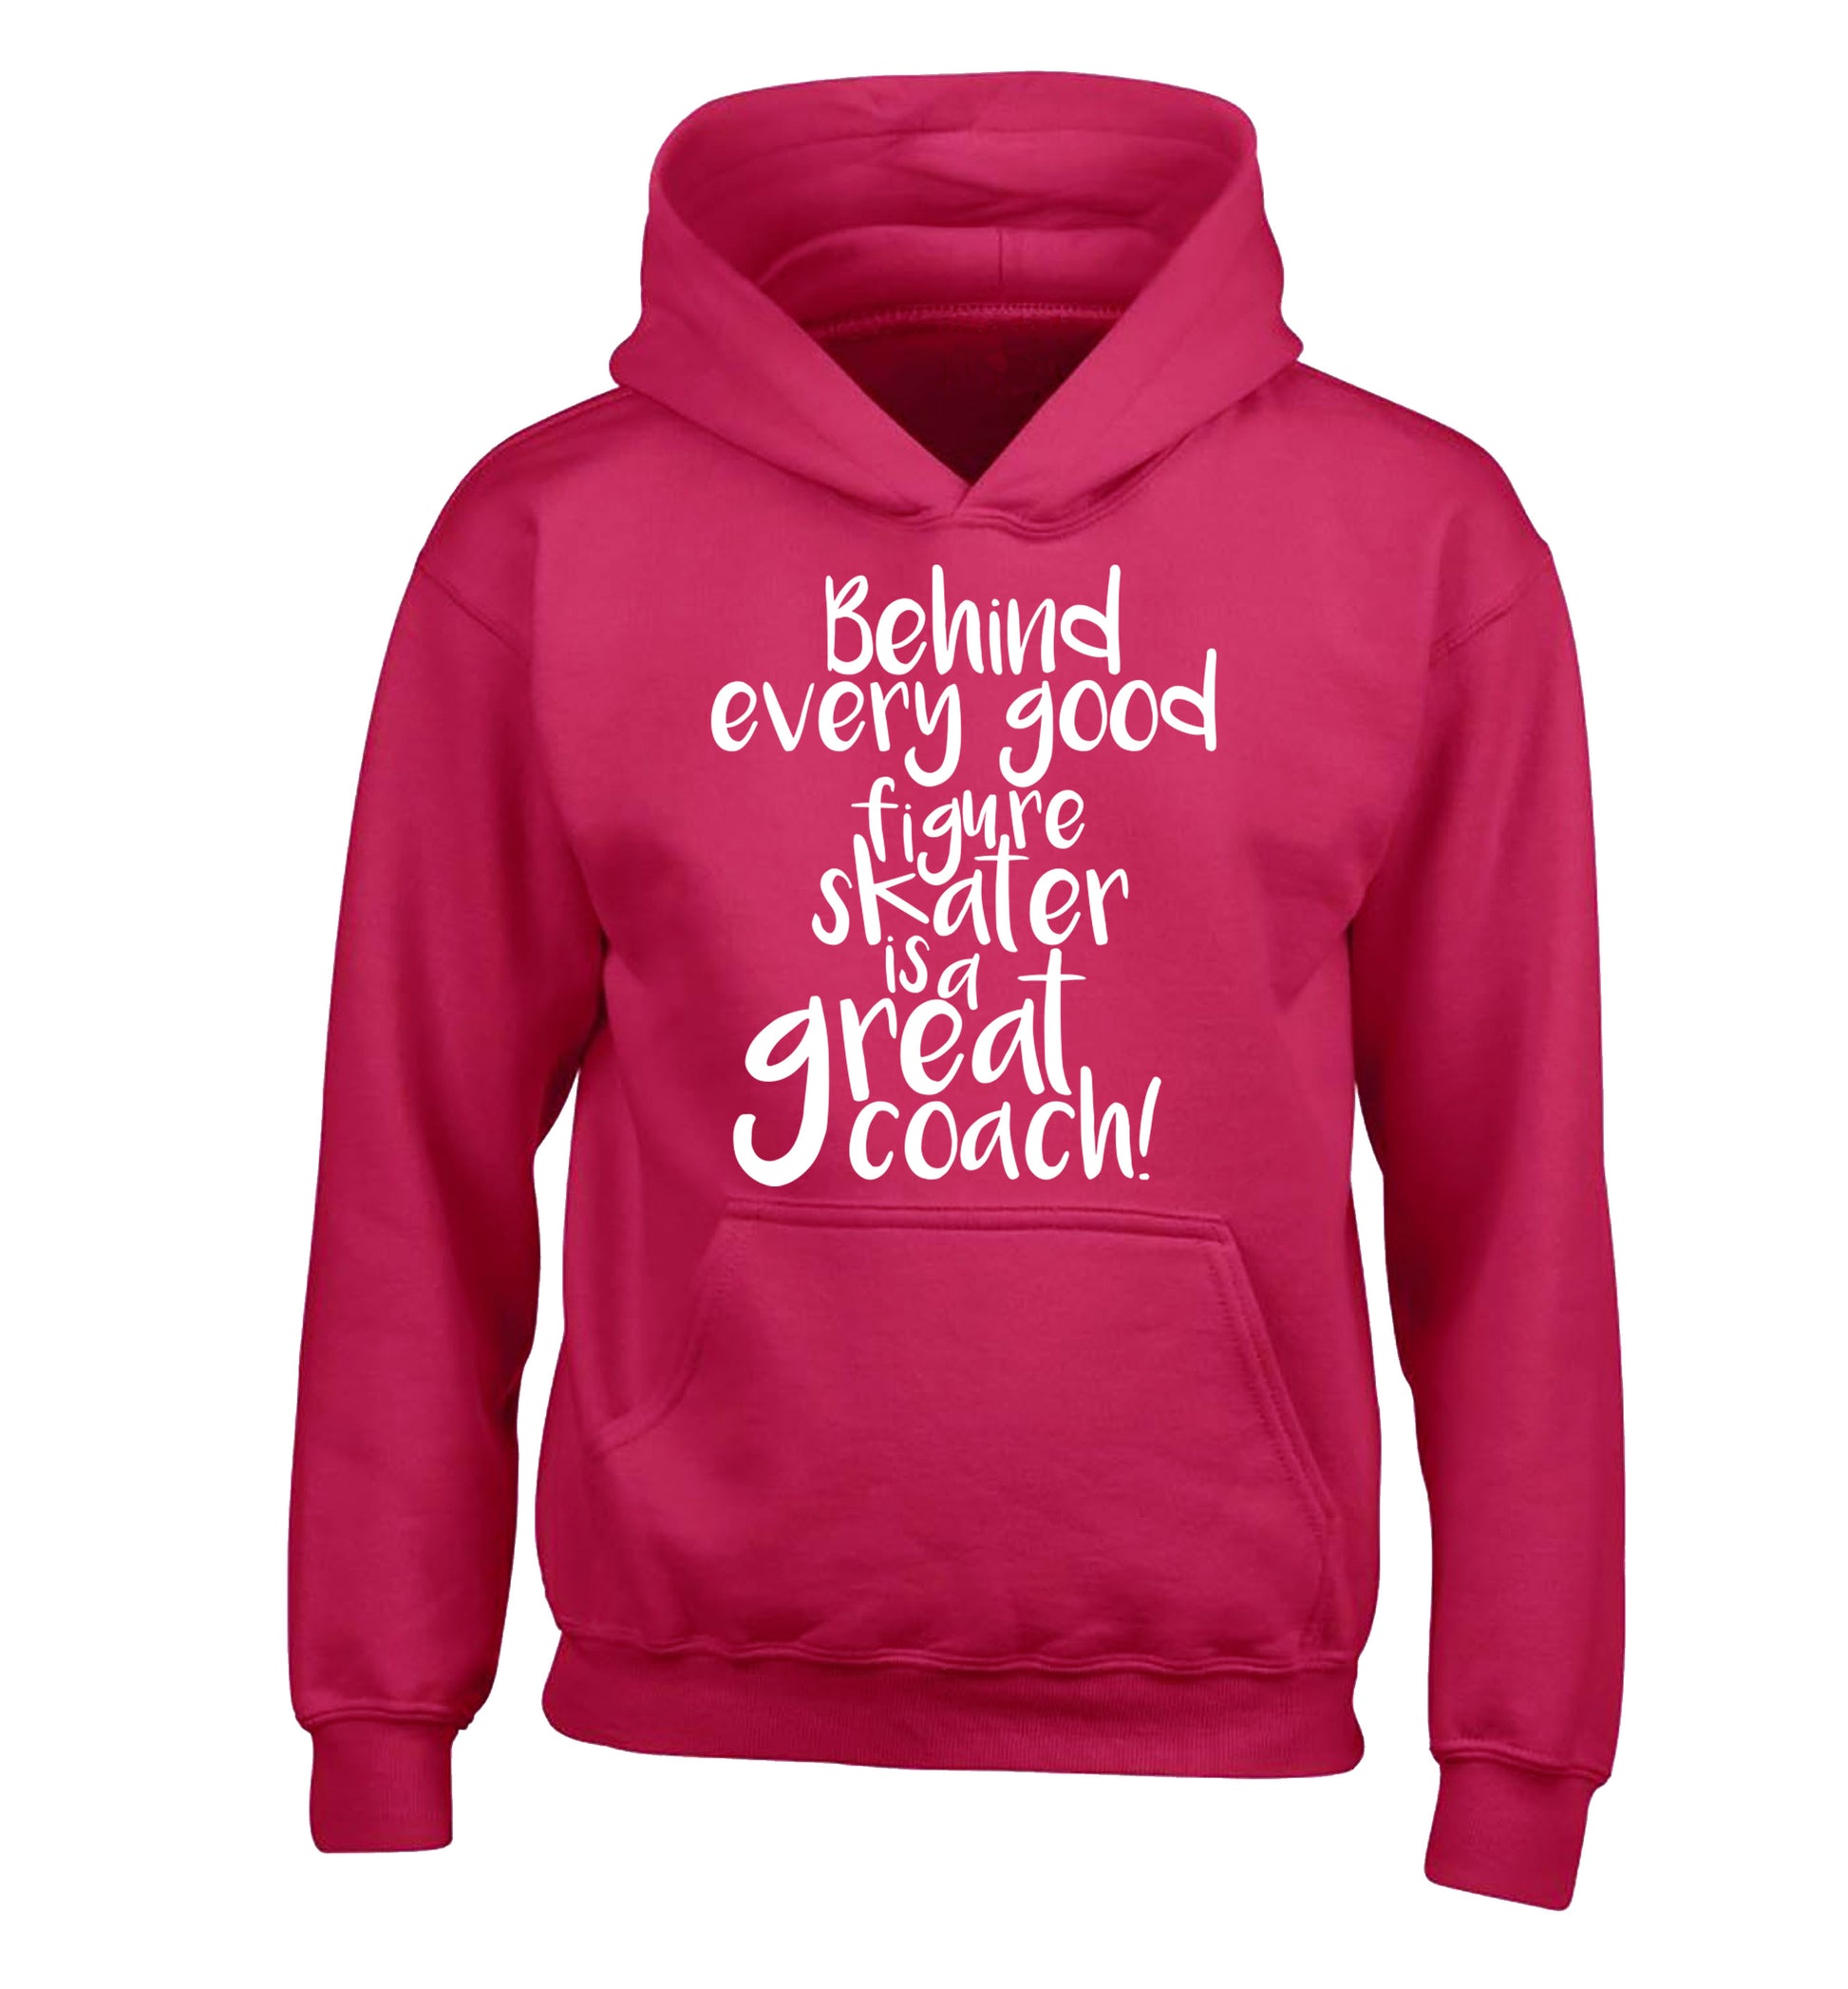 Behind every good figure skater is a great coach children's pink hoodie 12-14 Years